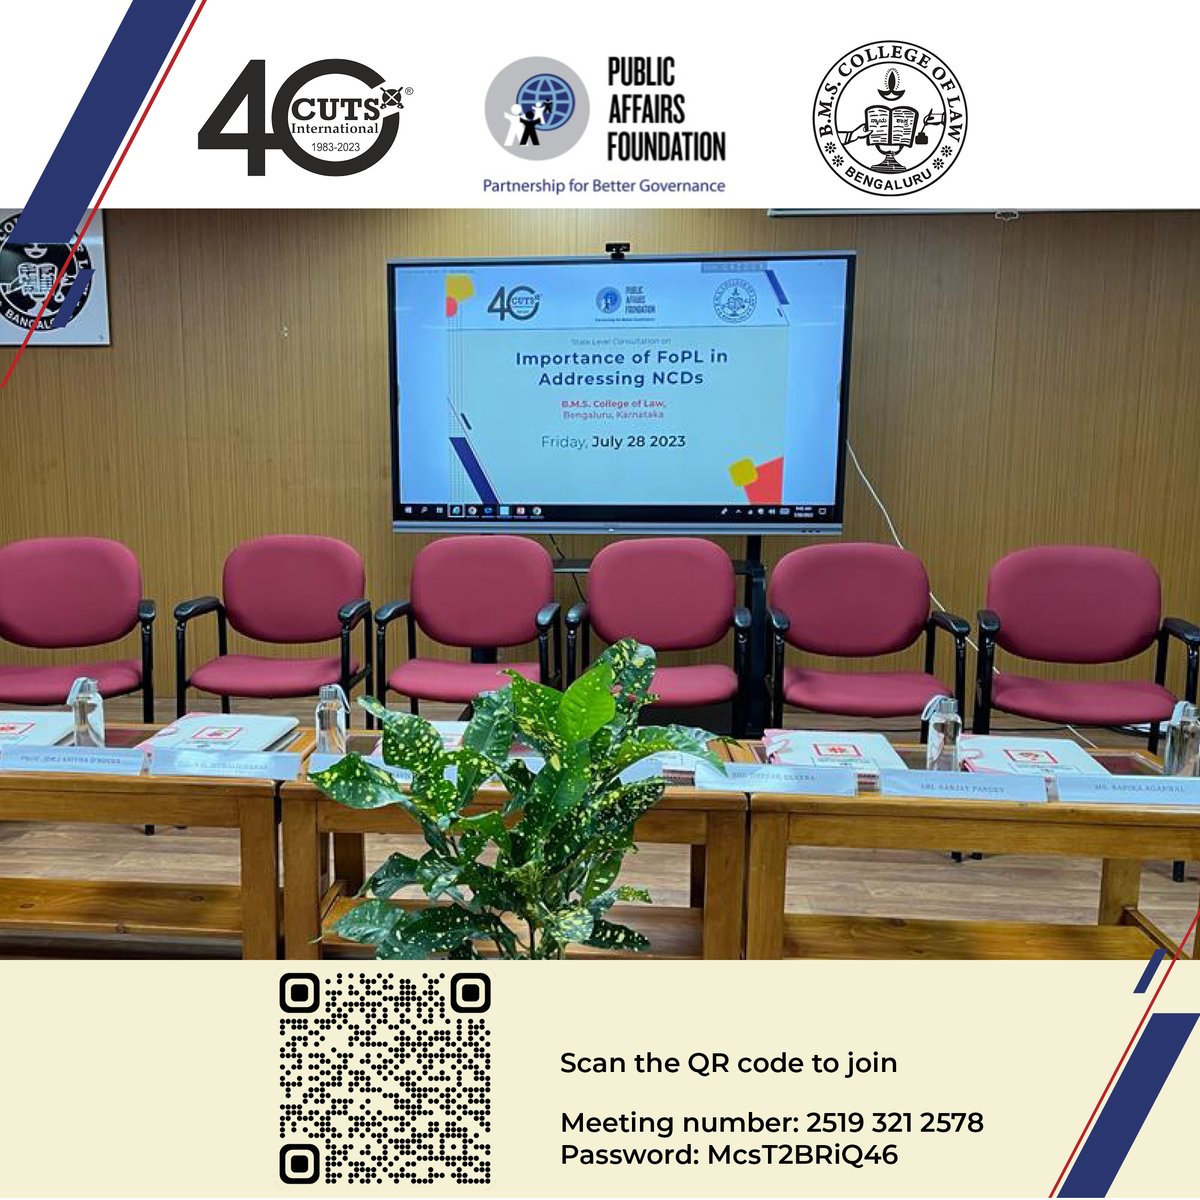 Kickstarting the State Level Consultation Workshop on the Importance of FoPL in addressing NCDs in association with CUTS international and BMS College of Law - Scan the QR code to join the live session.

@annaravi
@onthinktanks
@cutsint
@pacindia
@MoHFW_INDIA
@pafglobal